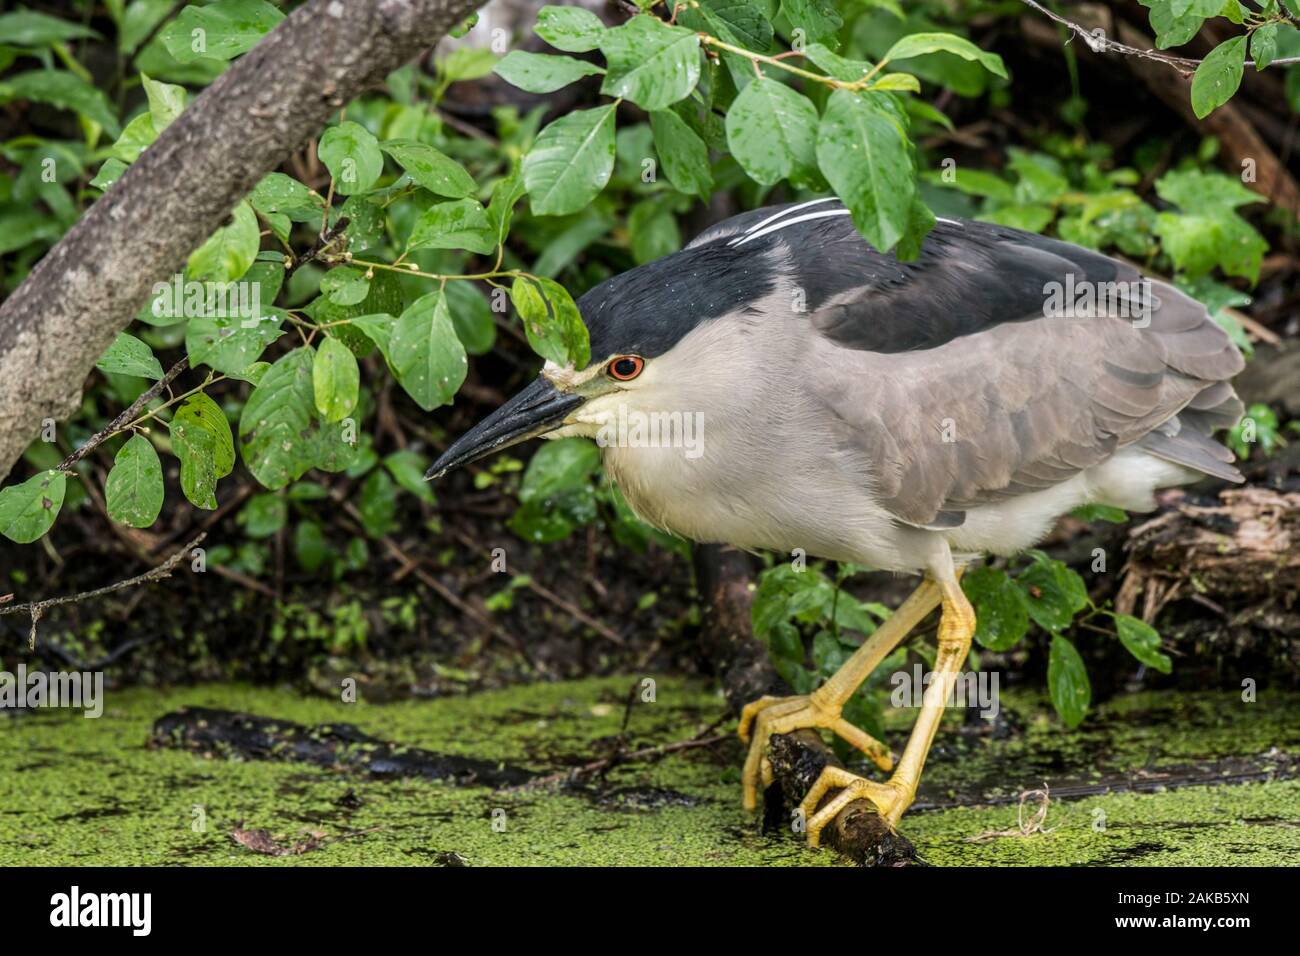 Black Crowned Night Heron Standing on Branch Stock Photo